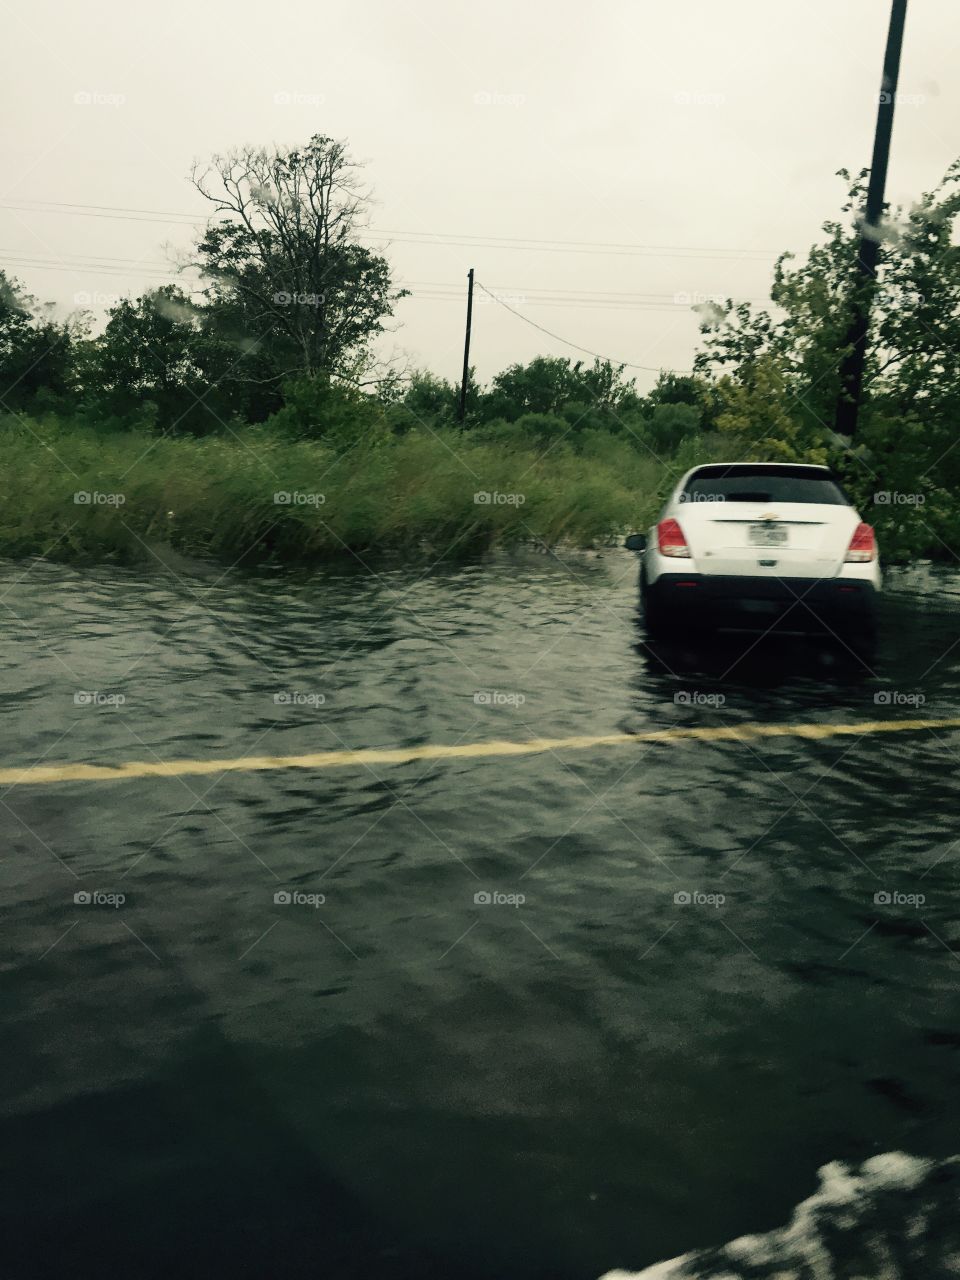 Some of the terrible flooding from hurricane Harvey.